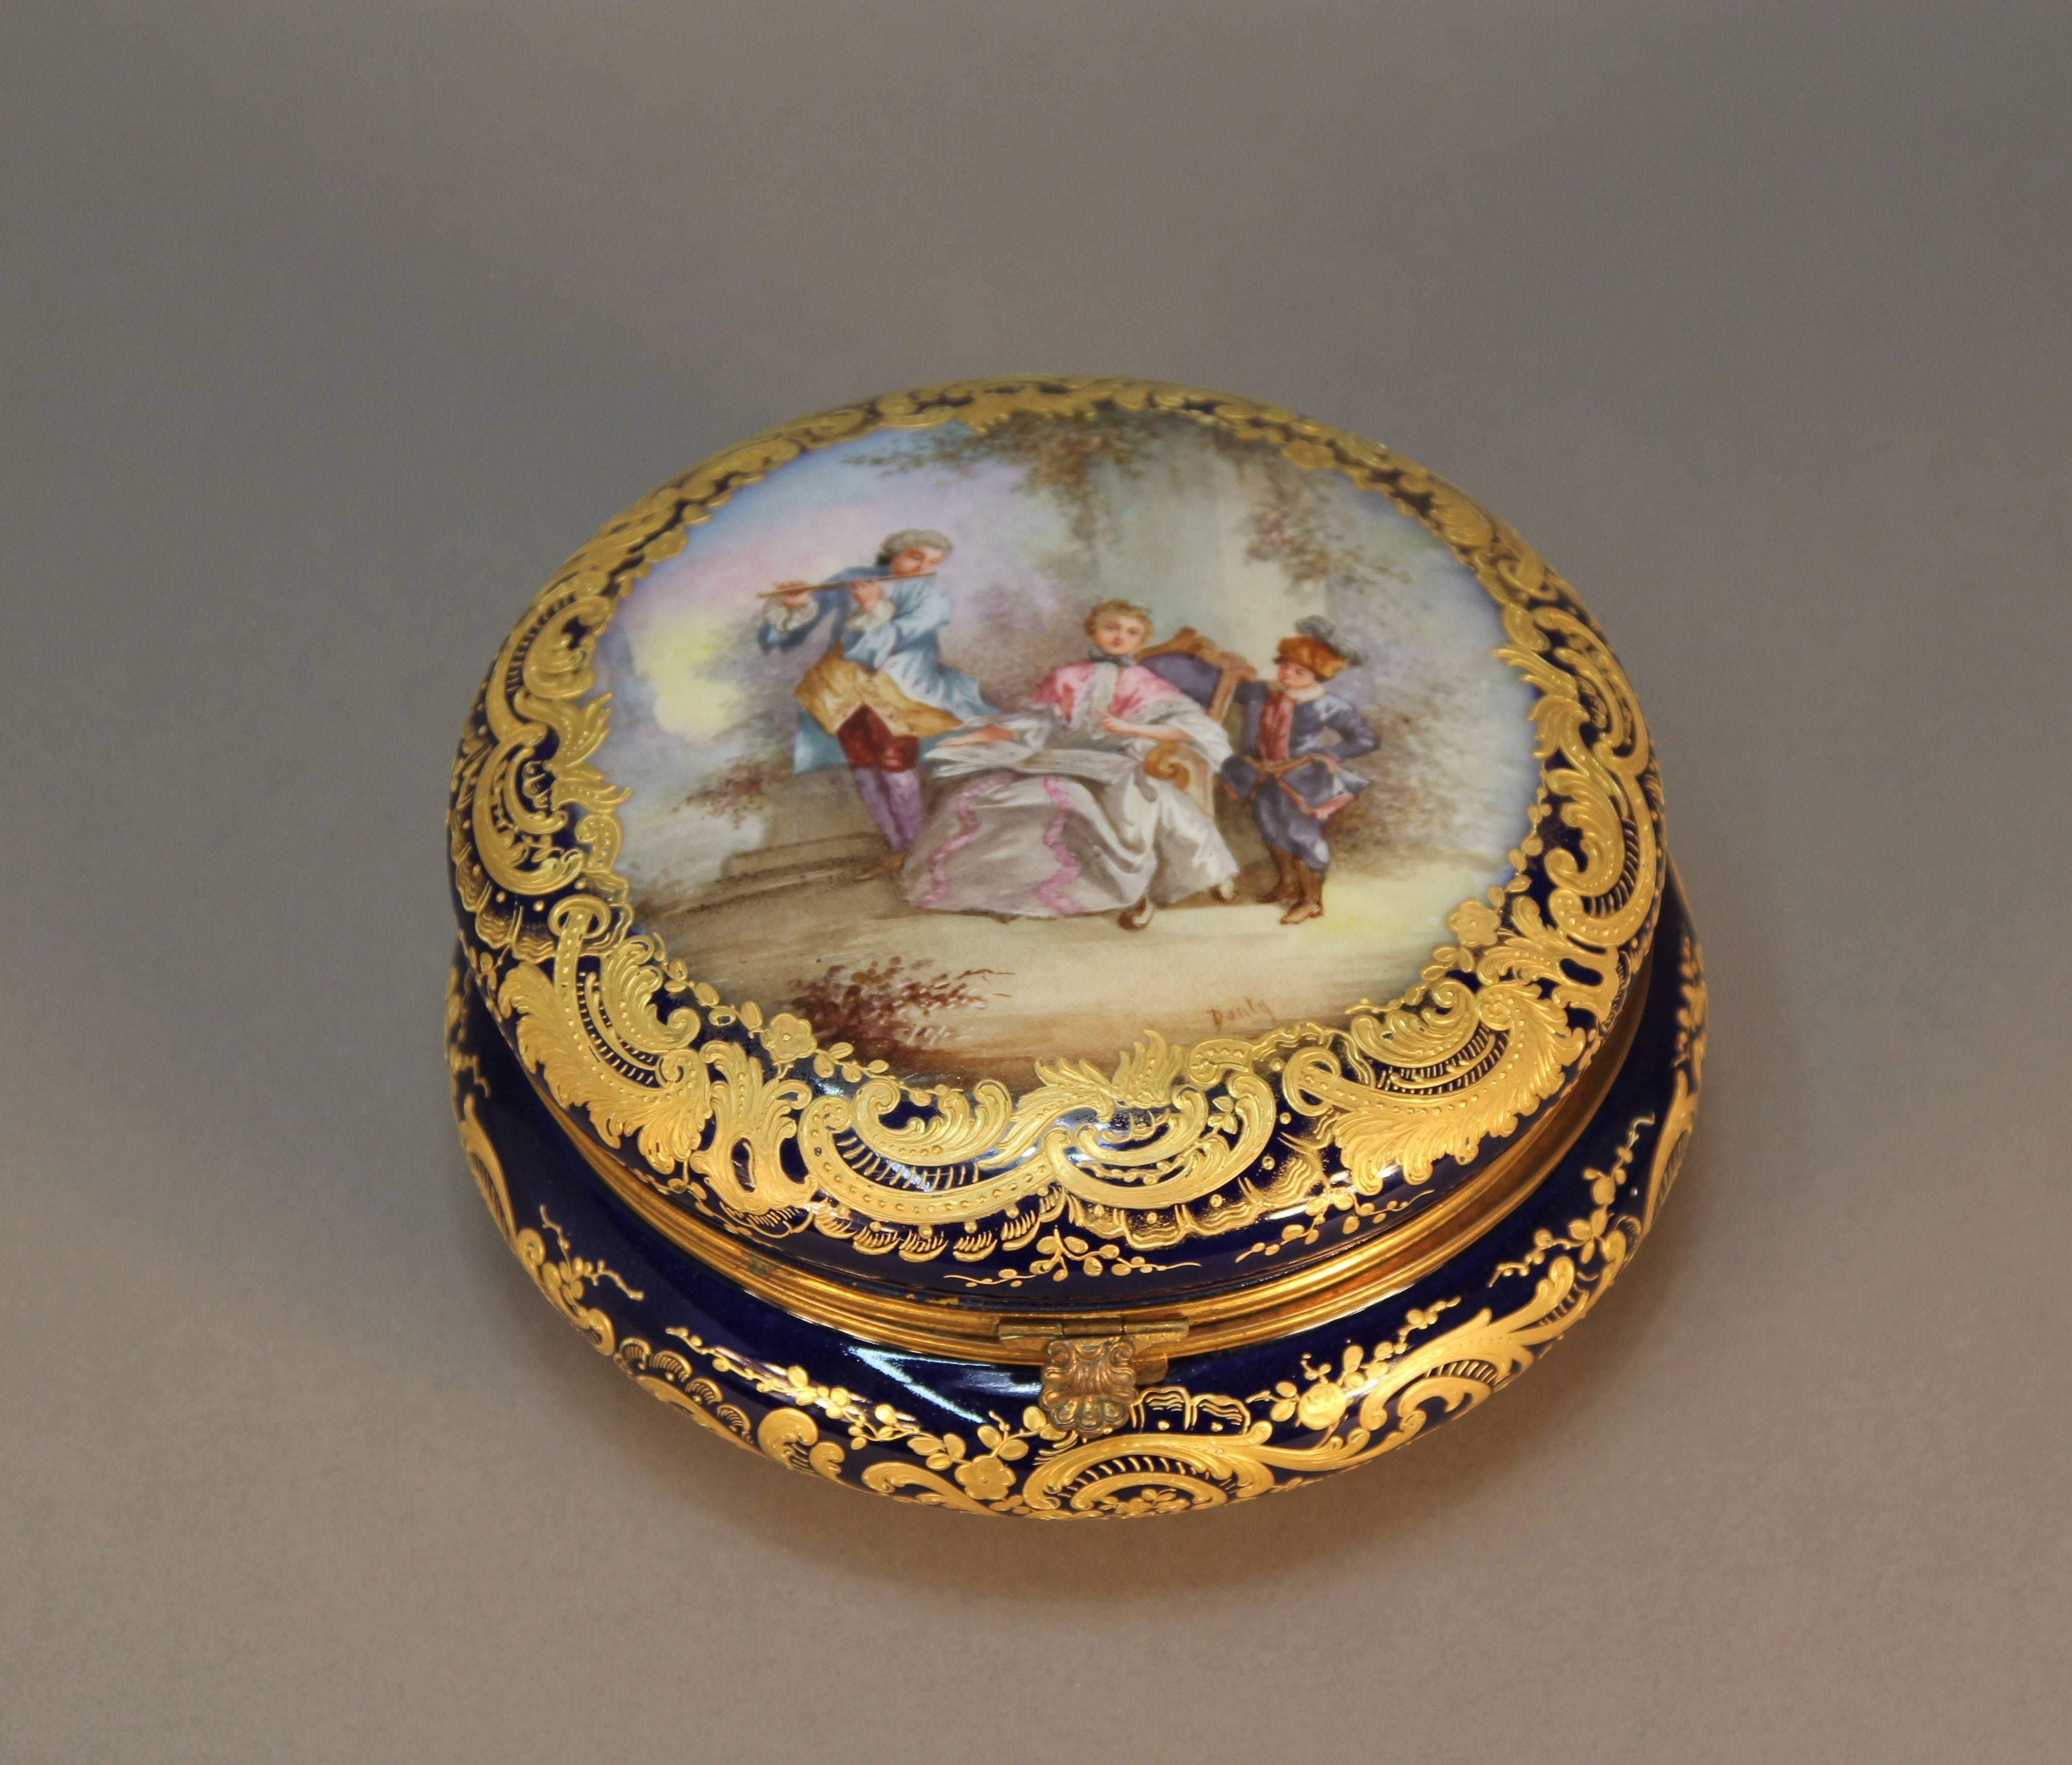 A museum quality cobalt blue Serves jewel box with rich raised gold decoration. All hand-painted and signed.